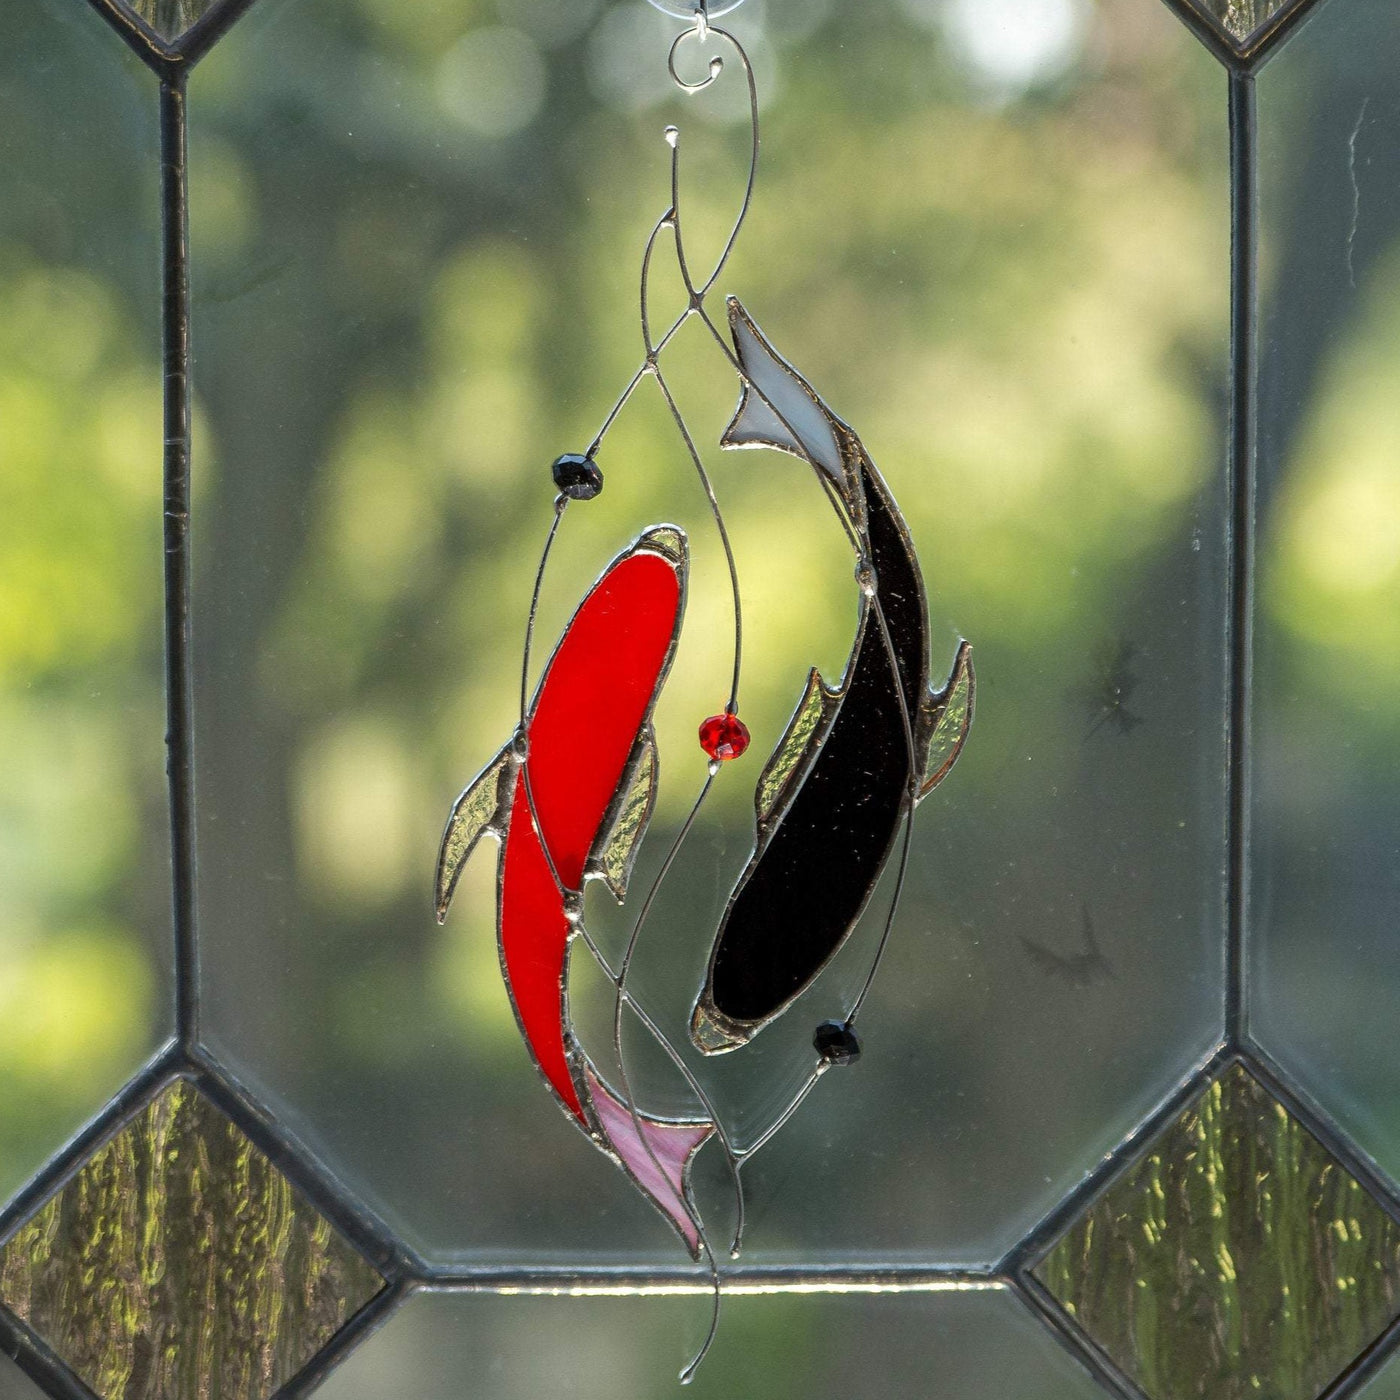 Window hanging of stained glass red and black fishes representing yin yang